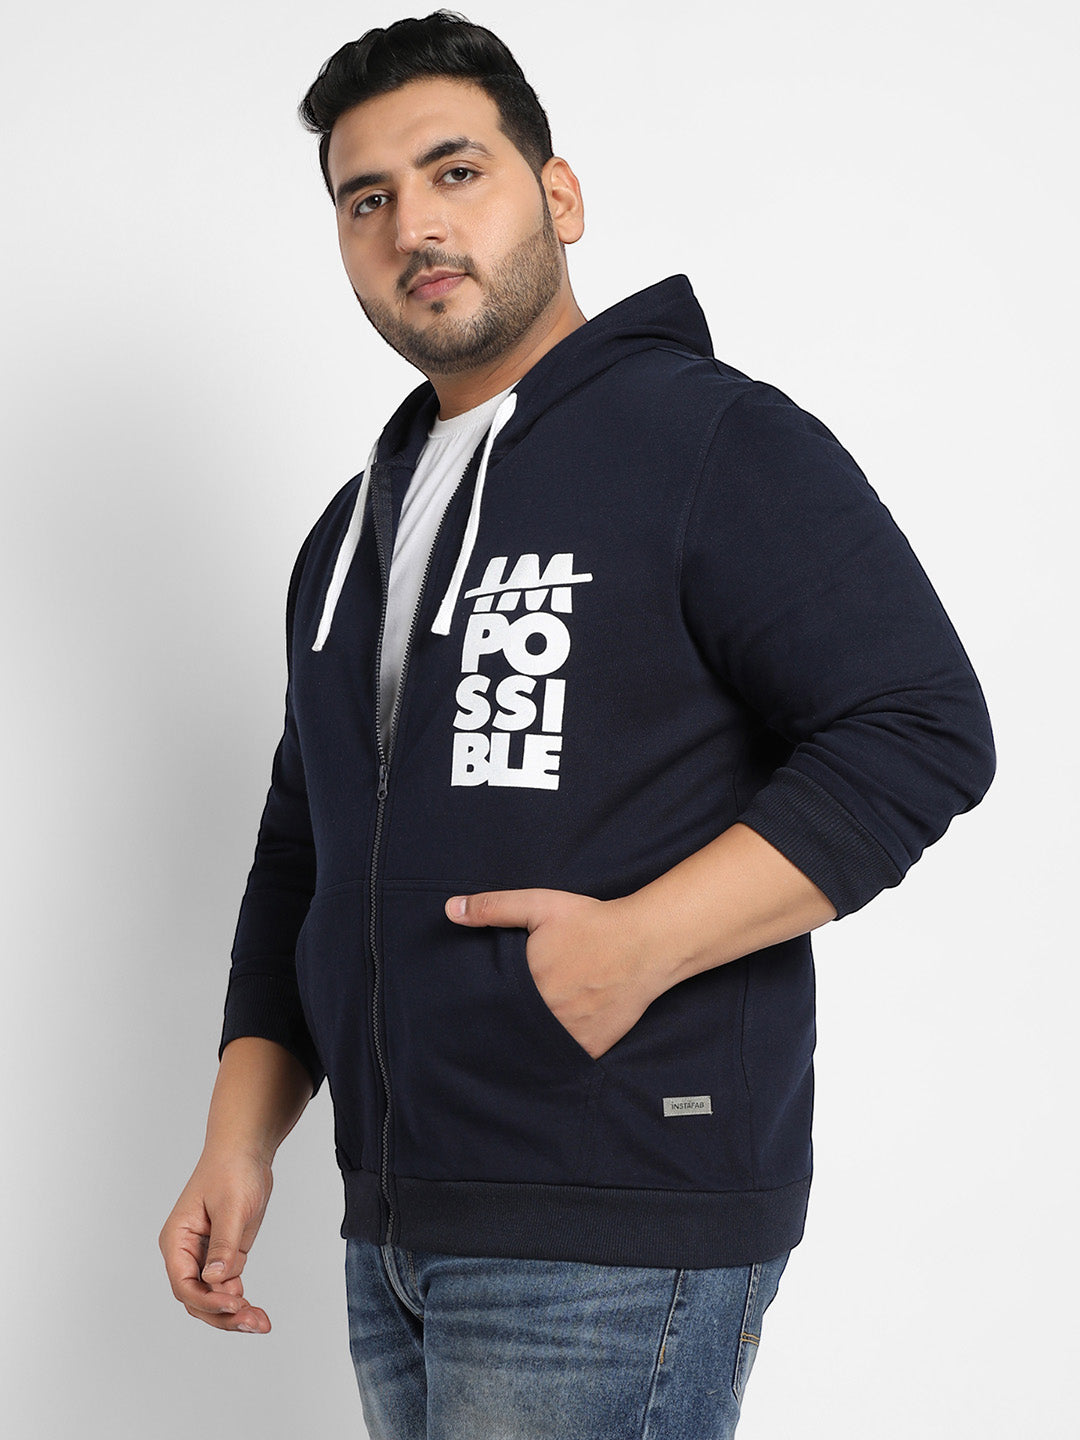 Navy Blue Zip-Front Impossible Hoodie With Contrast Drawstring